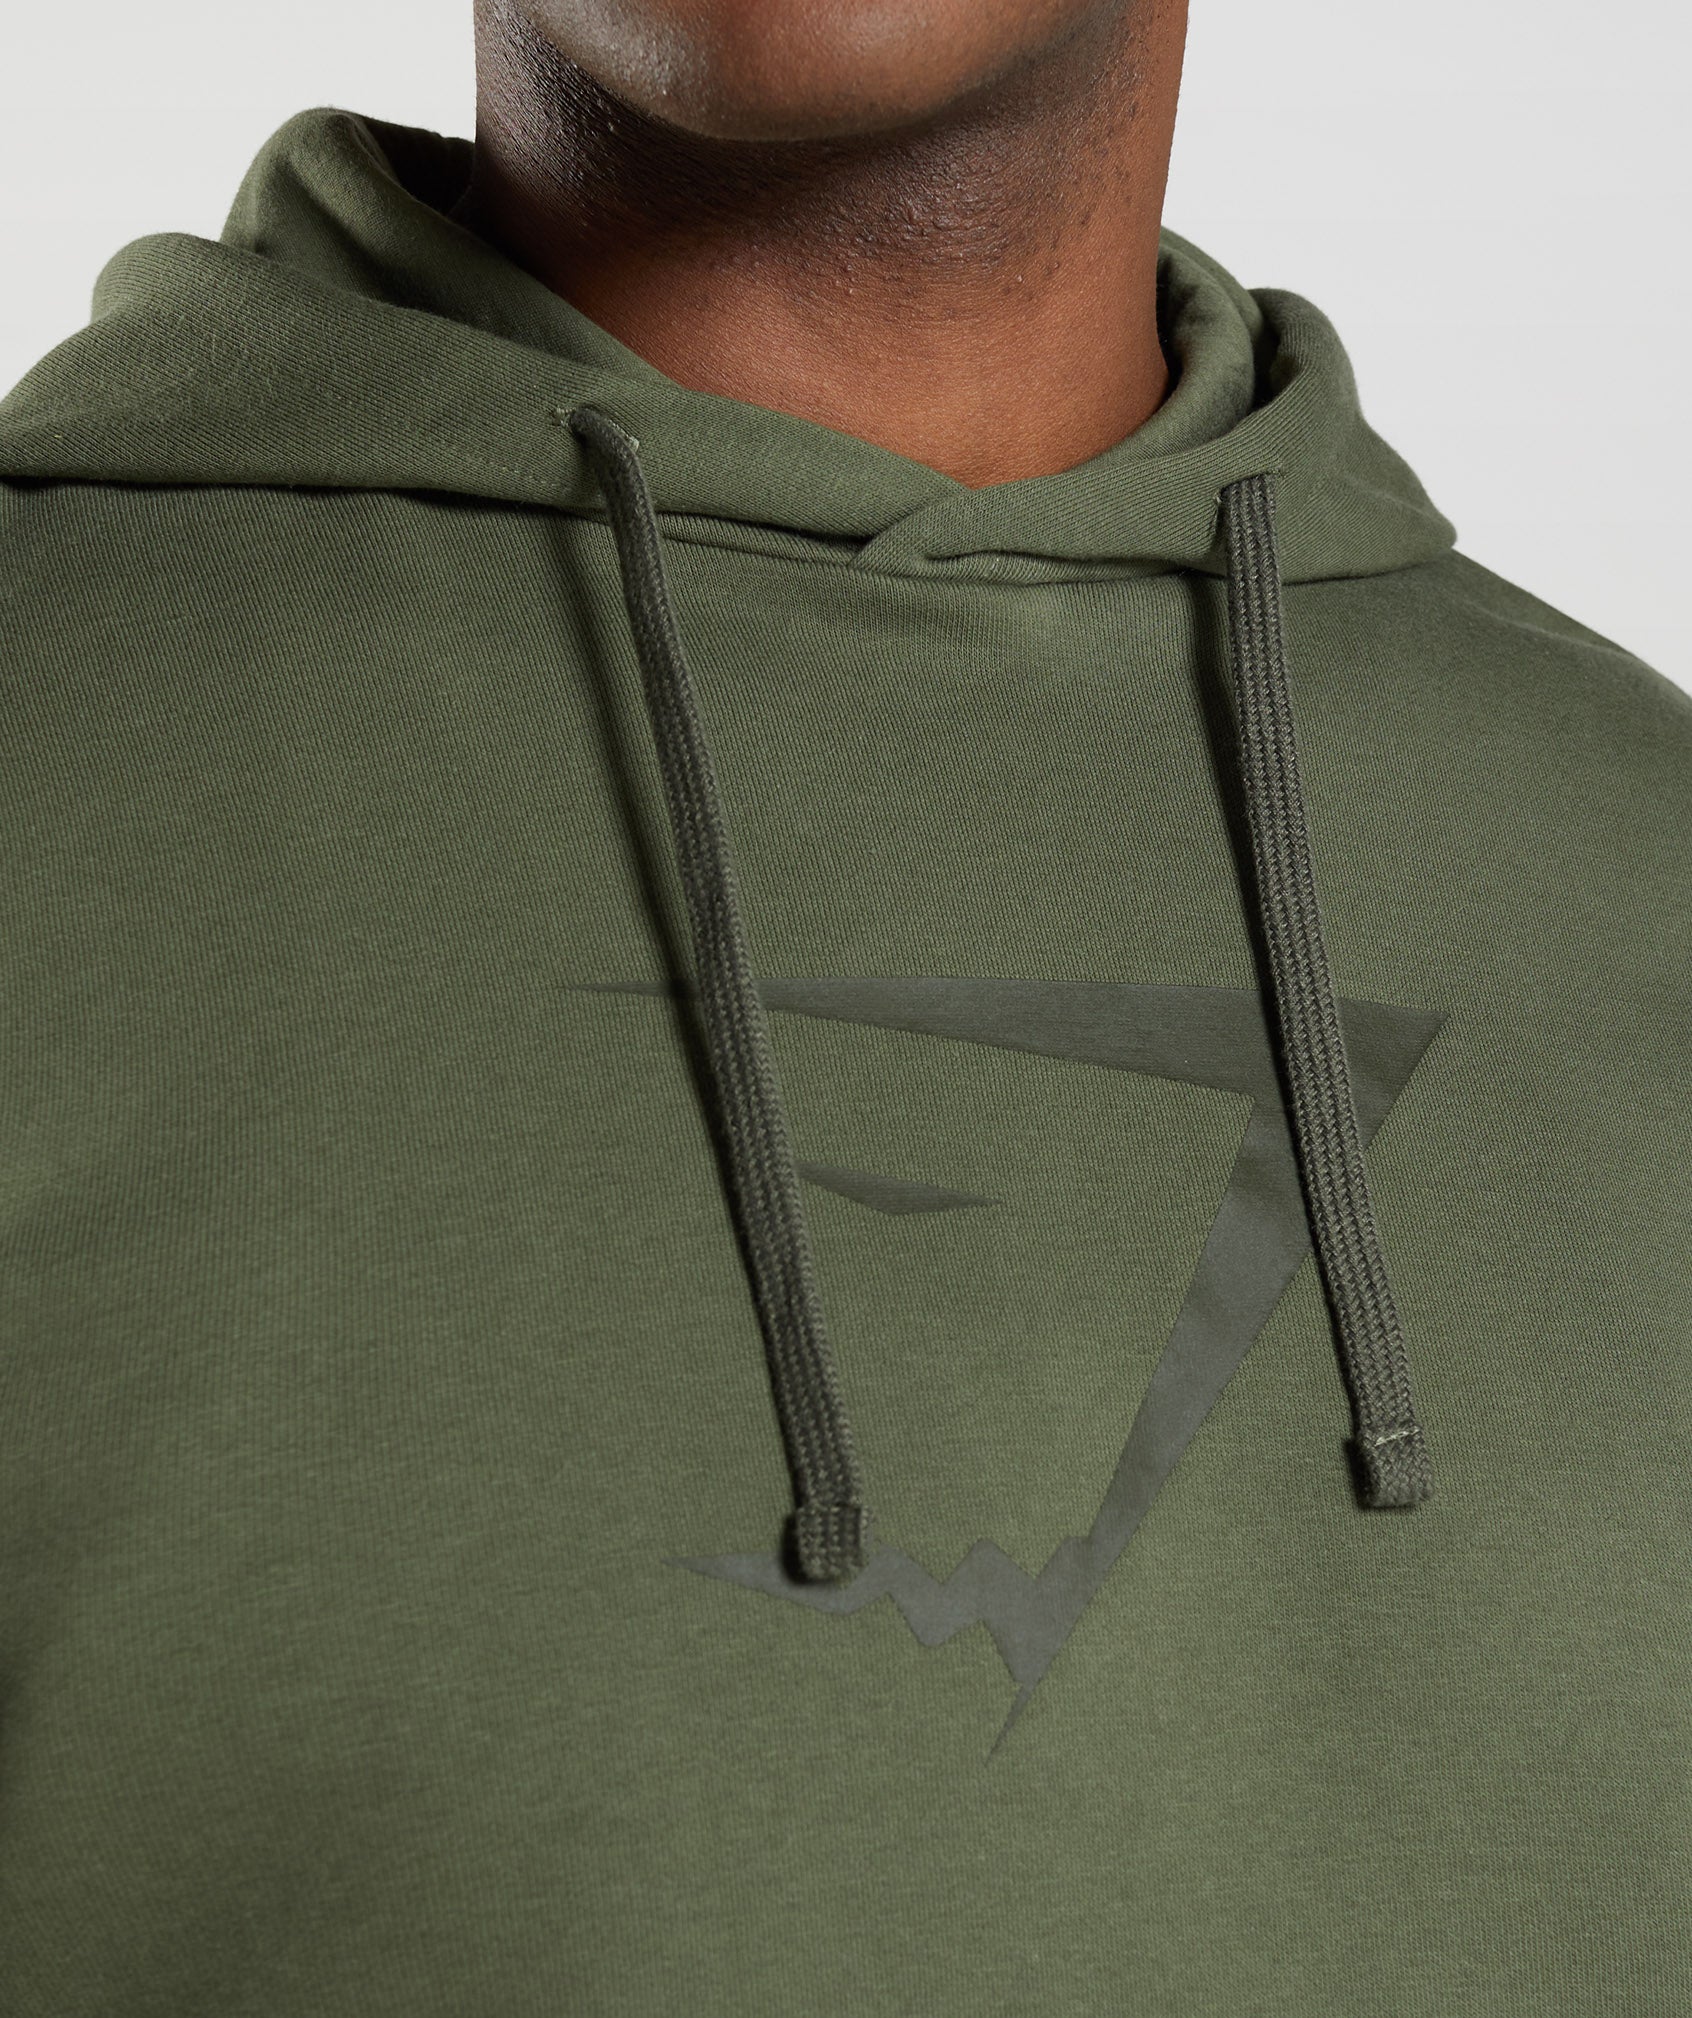 Sharkhead Infill Hoodie in Core Olive - view 3